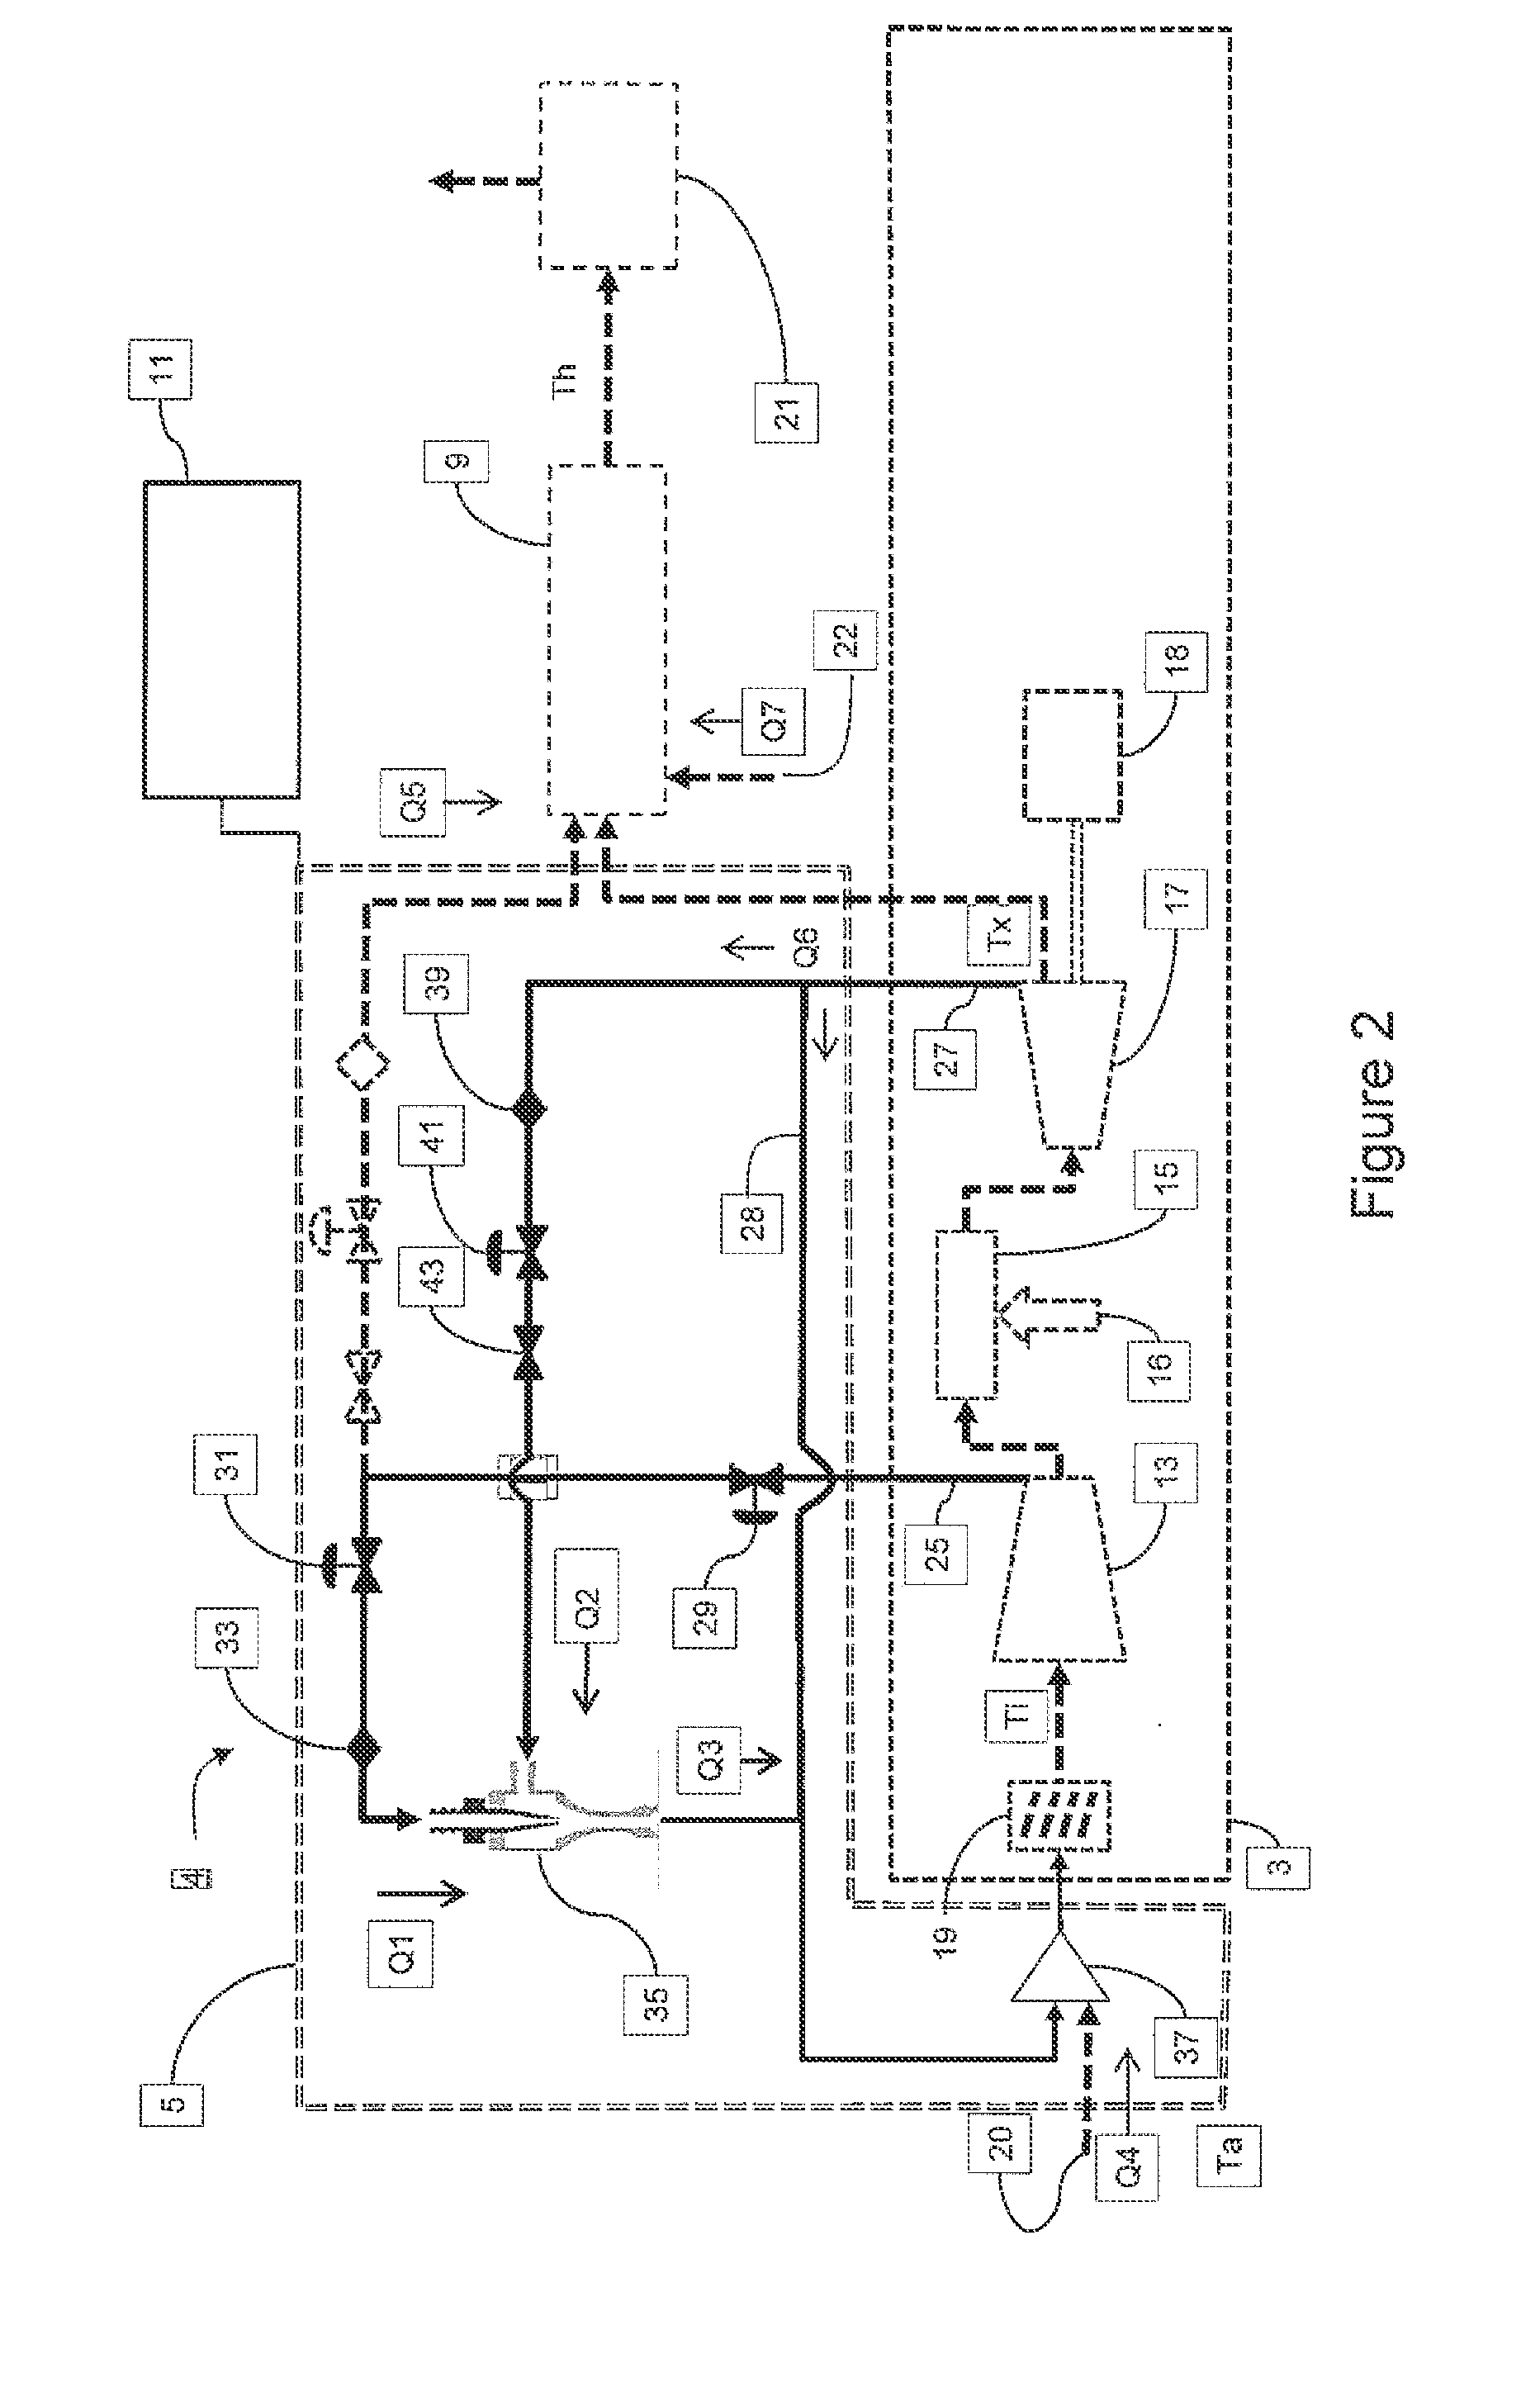 Method and apparatus for optimizing the operation of a turbine system under flexible loads